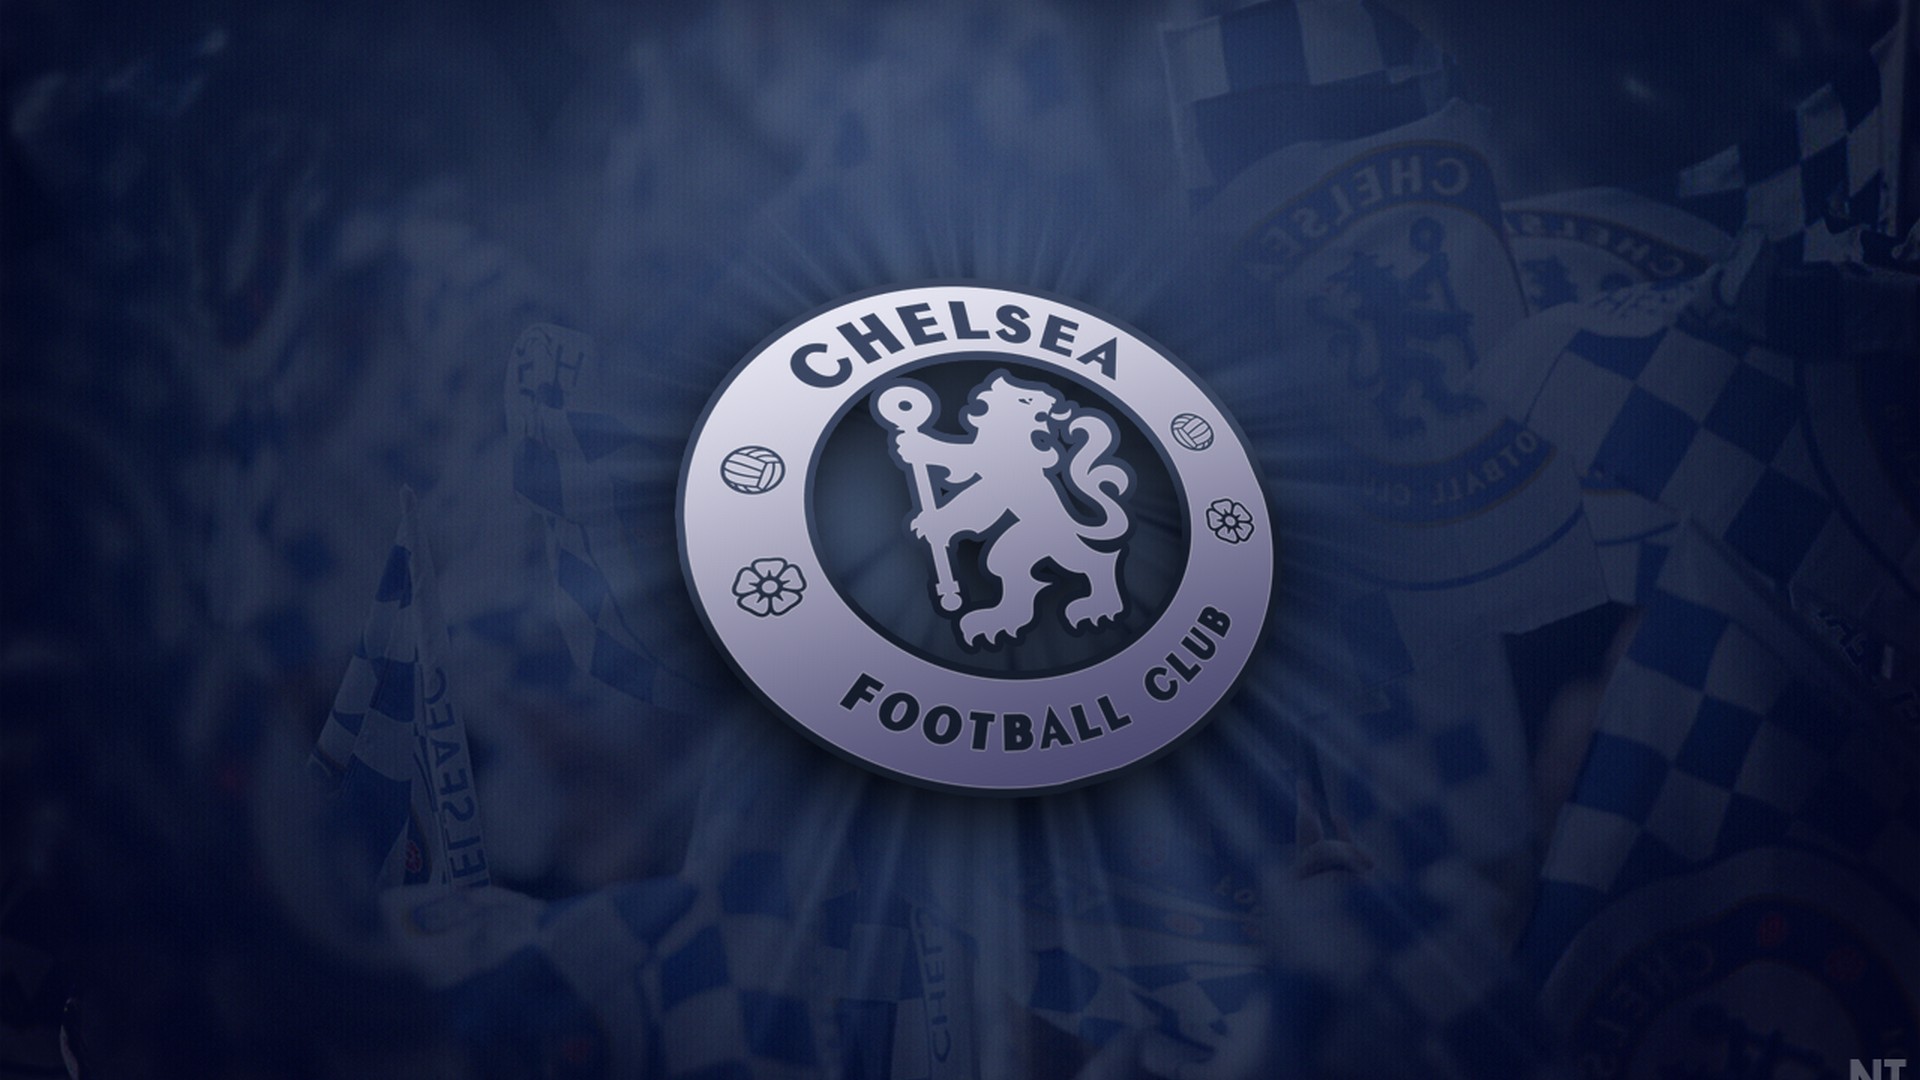 HD Chelsea Champions League Backgrounds with resolution 1920x1080 pixel. You can make this wallpaper for your Mac or Windows Desktop Background, iPhone, Android or Tablet and another Smartphone device